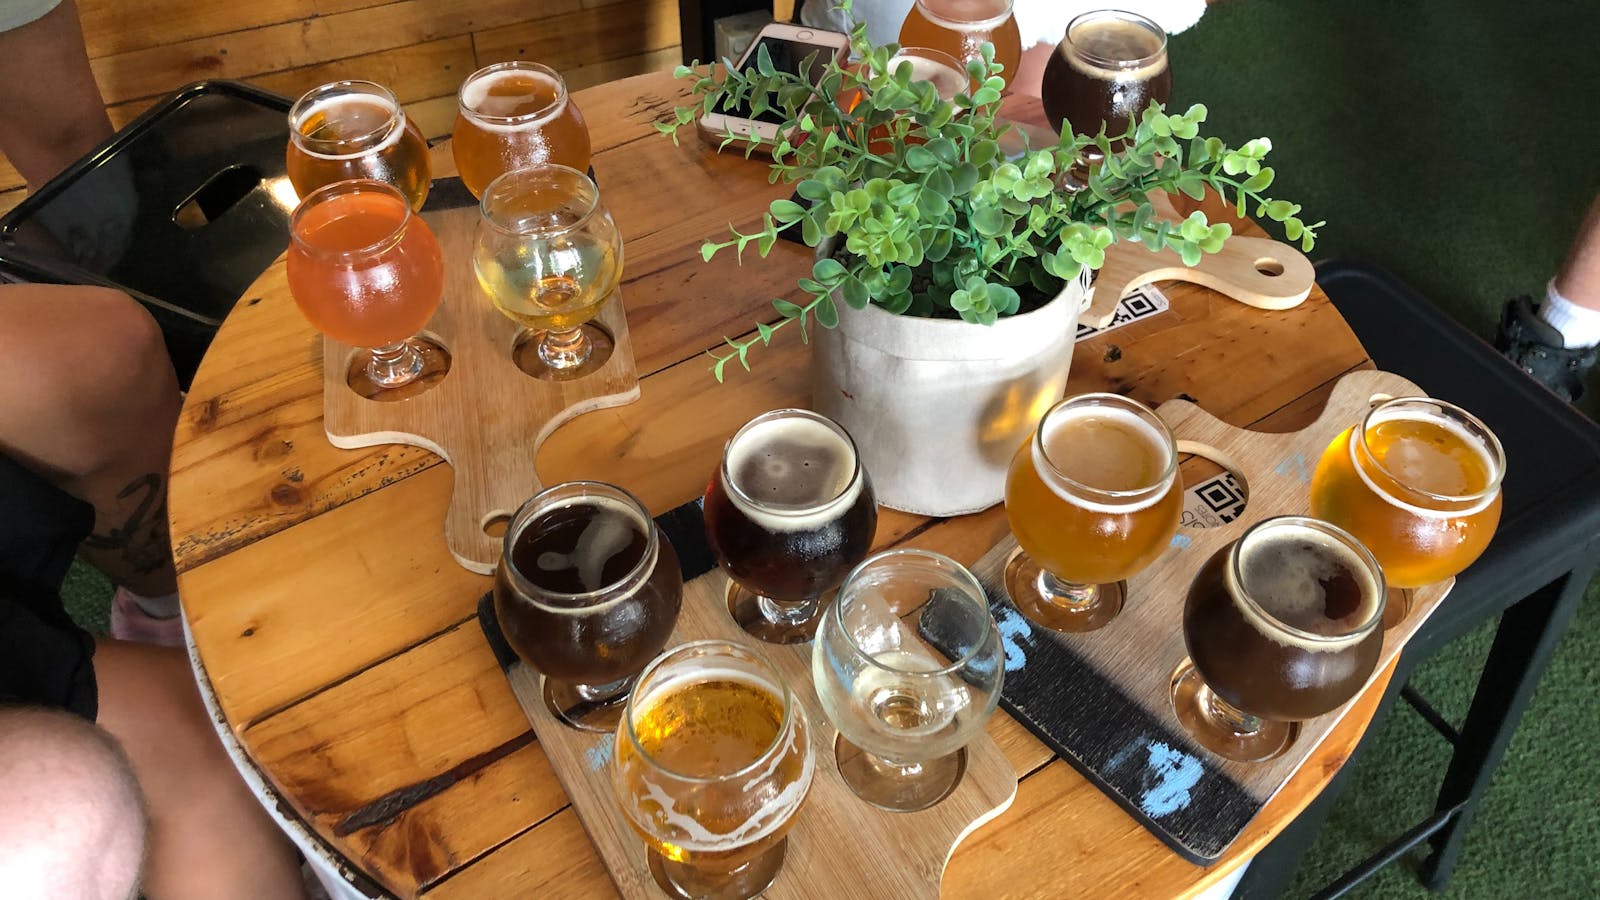 An array of beer tasters to enjoy!